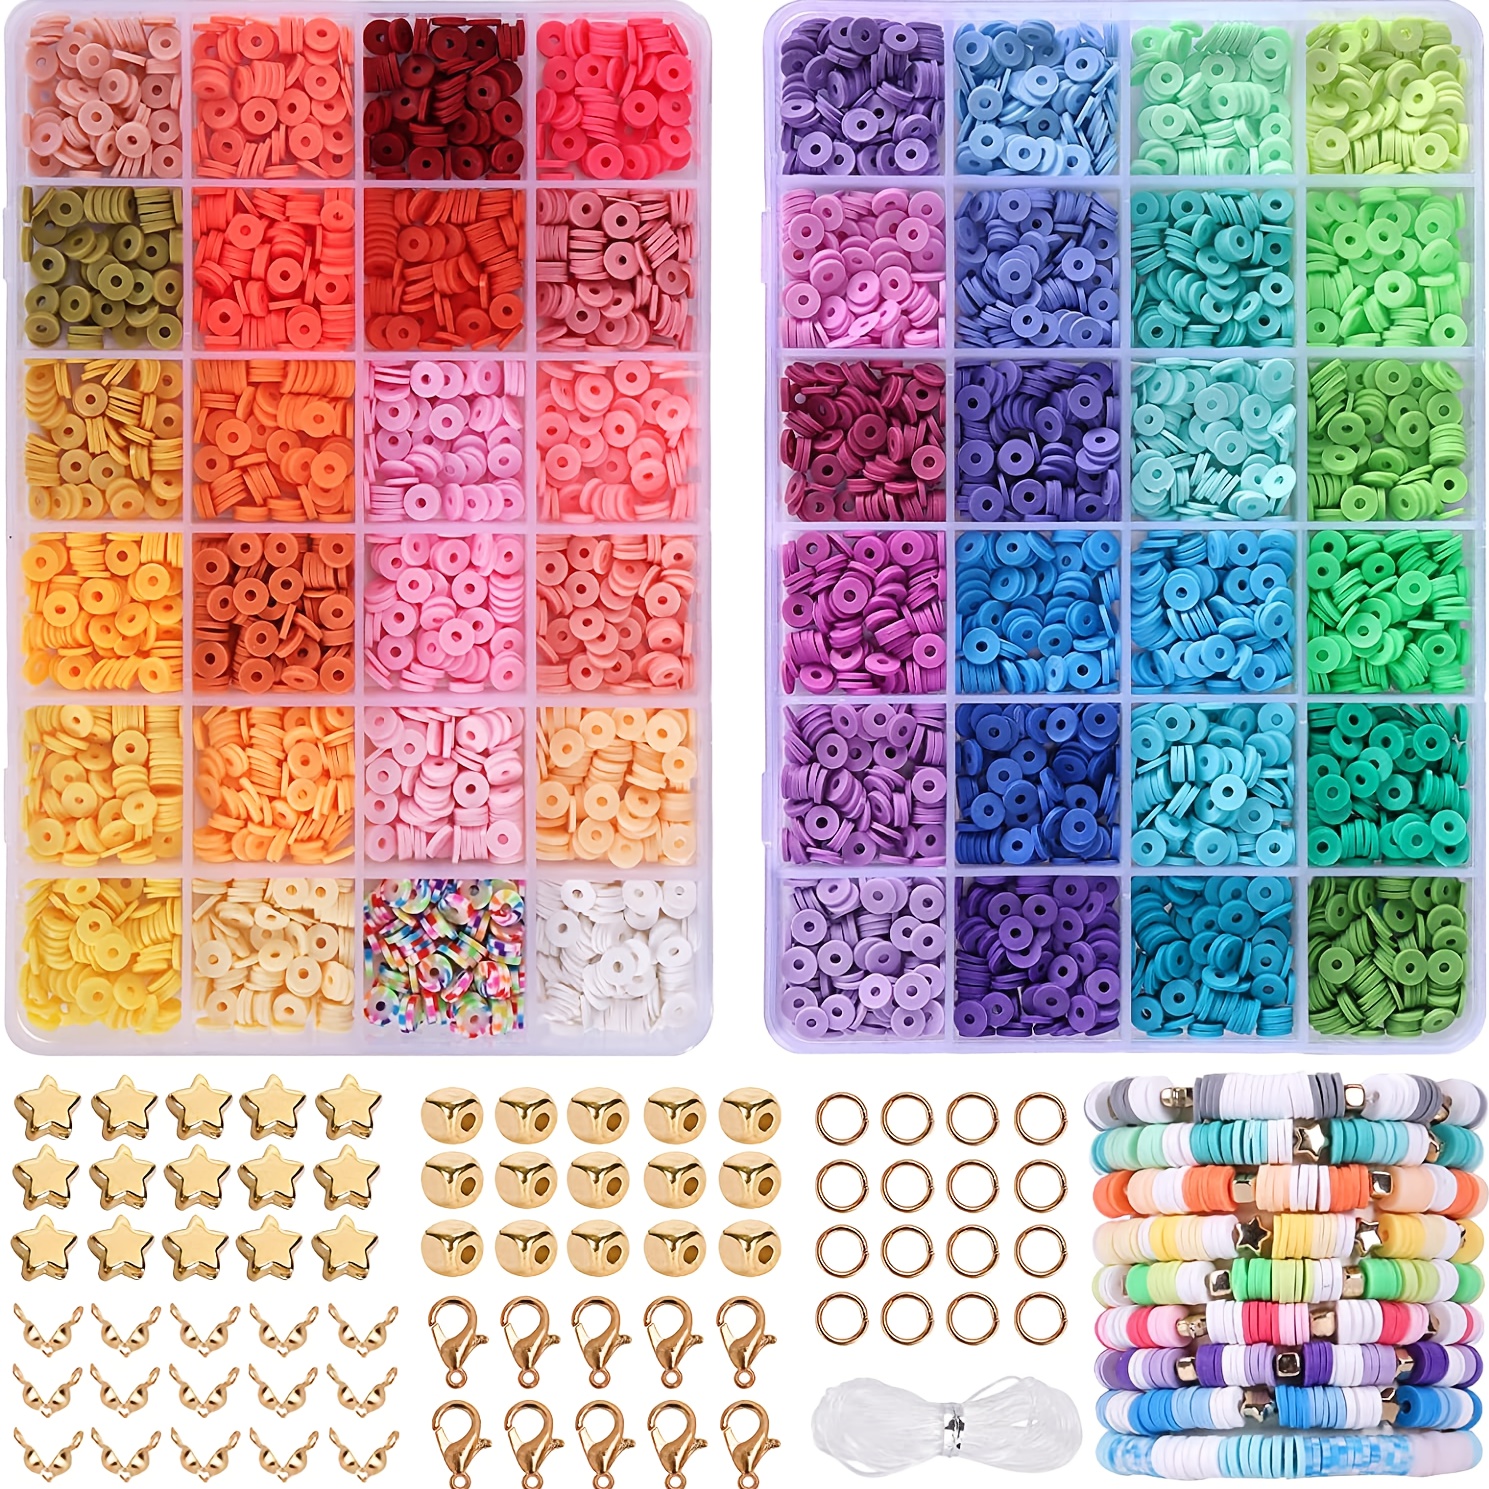 Flat Round 6mm Polymer Preppy Beads for DIY Jewelry Making - China Beads  and Polymer Clay Beads price